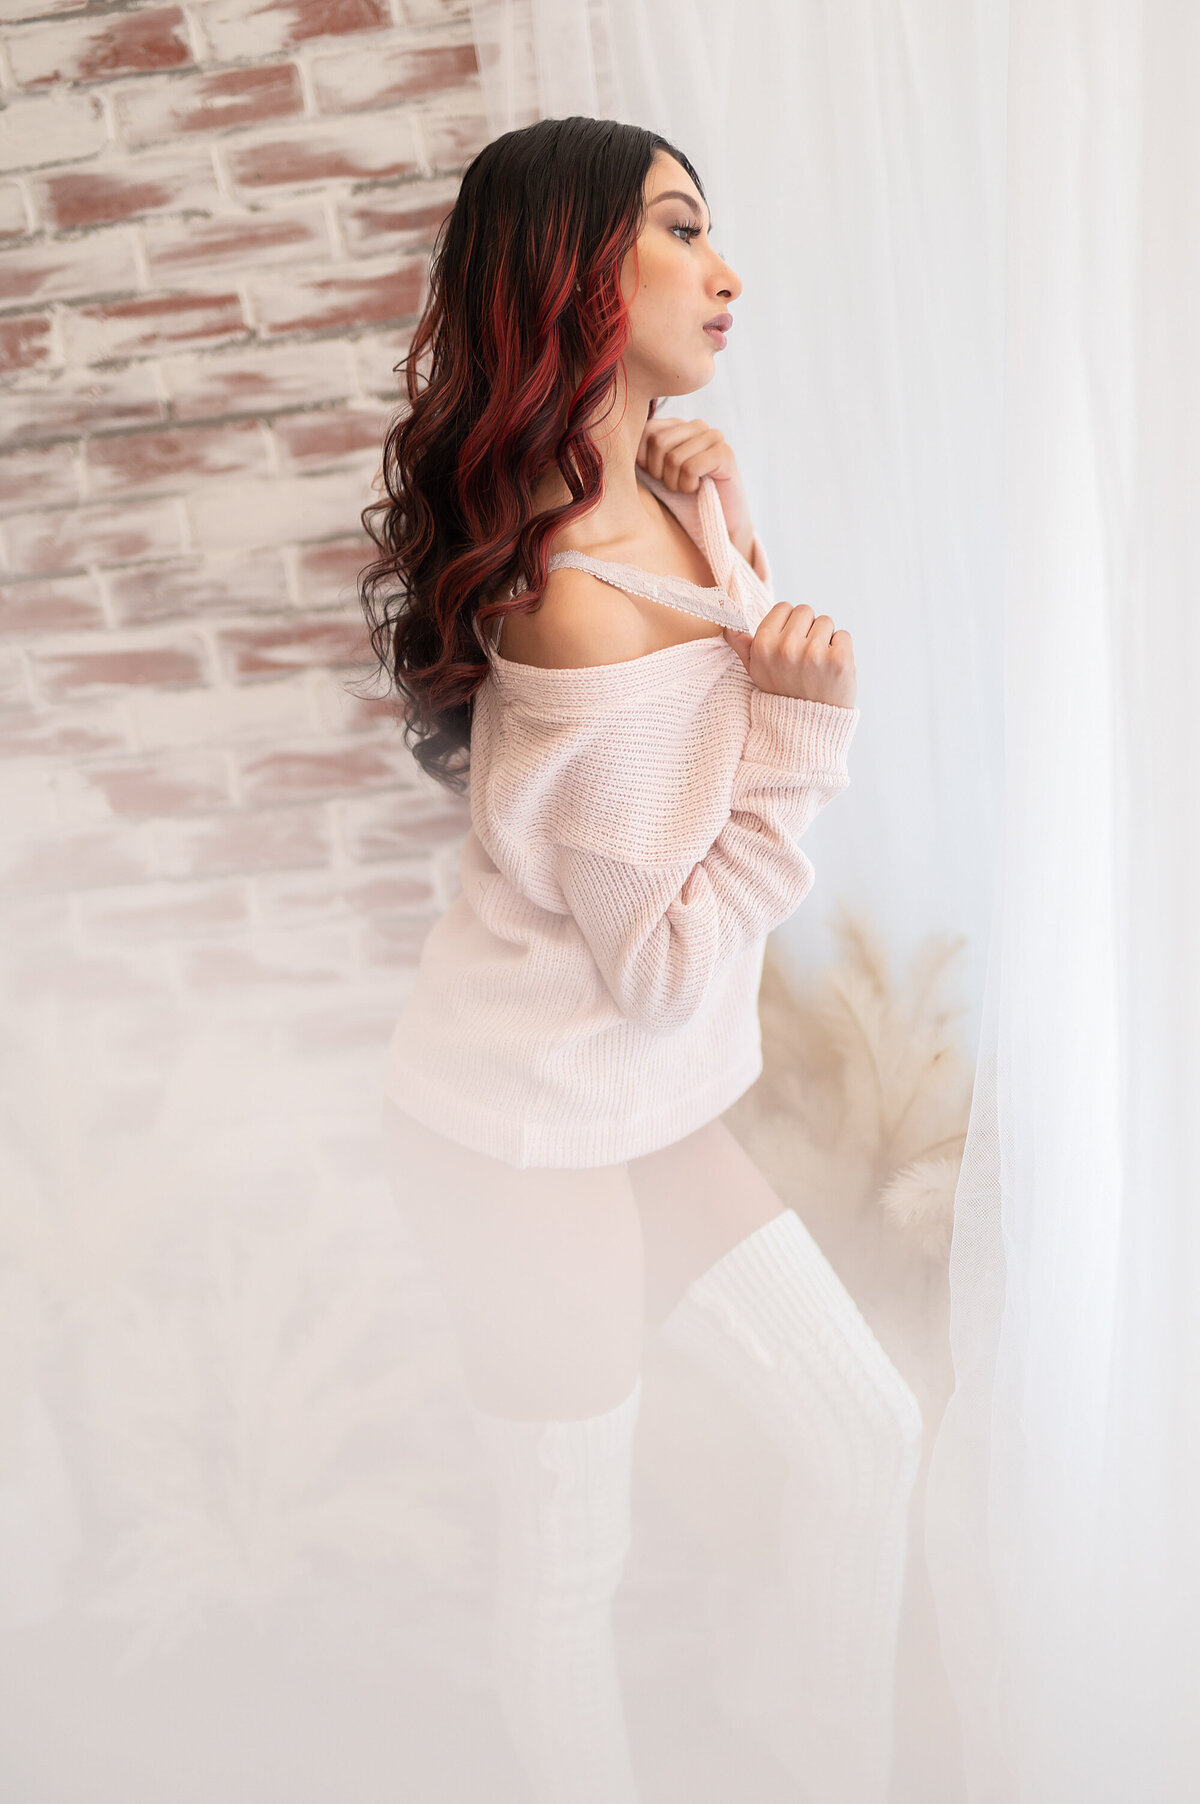 A brunette woman with magenta highlights poses in our Waukesha photo studio for a cozy studio boudoir session.